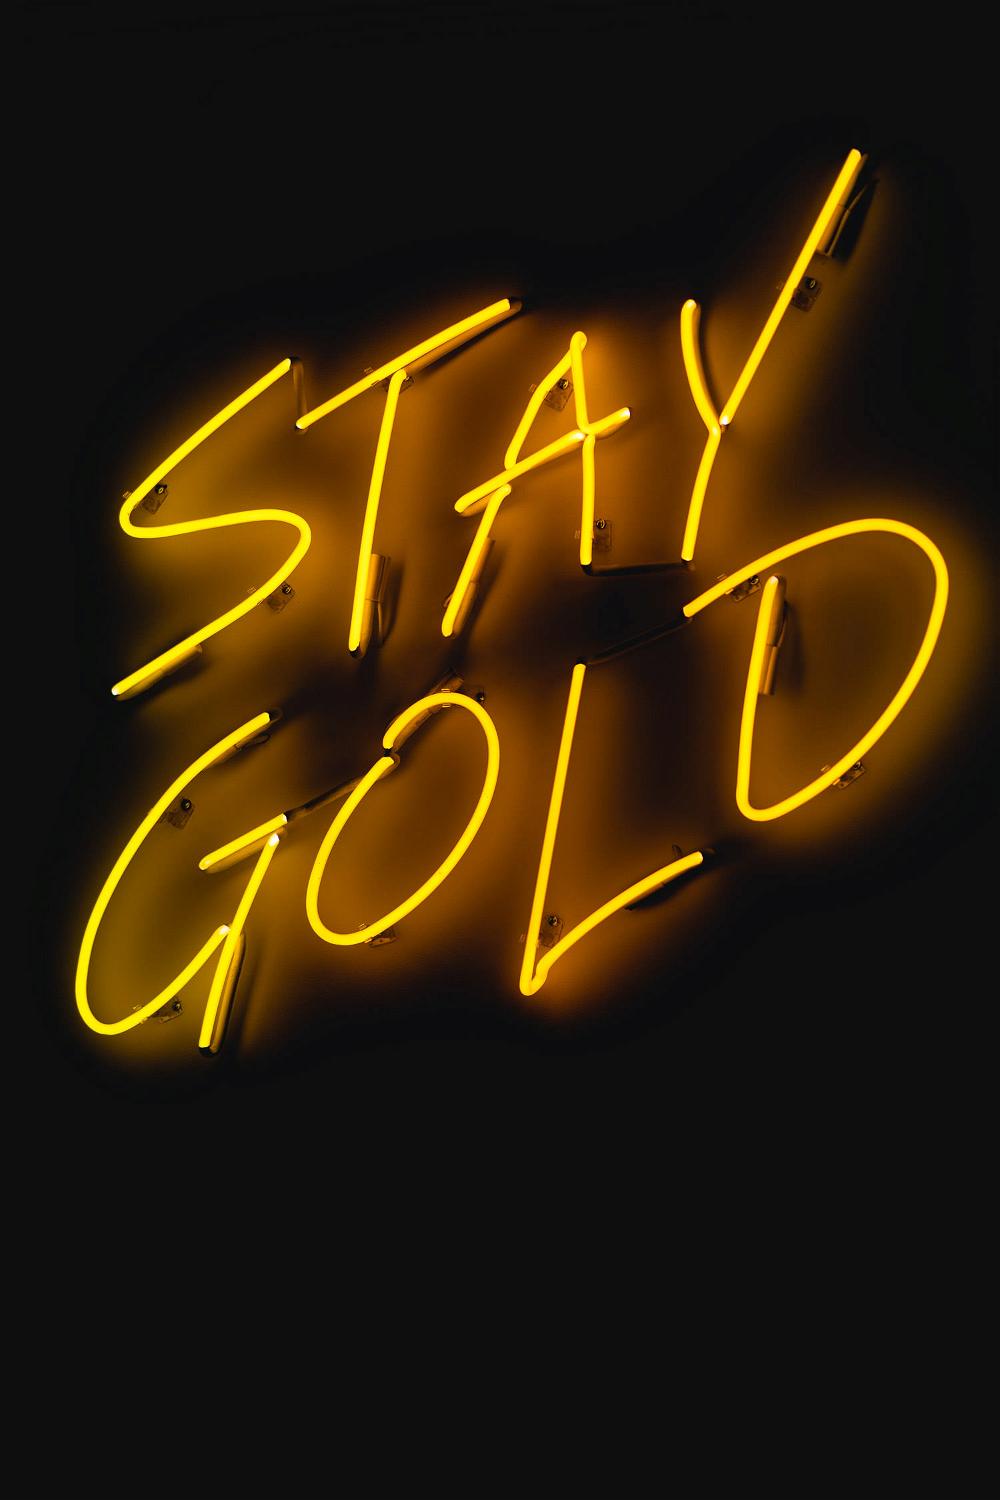 Stay gold neon sign in wework bogota la 93 colombia